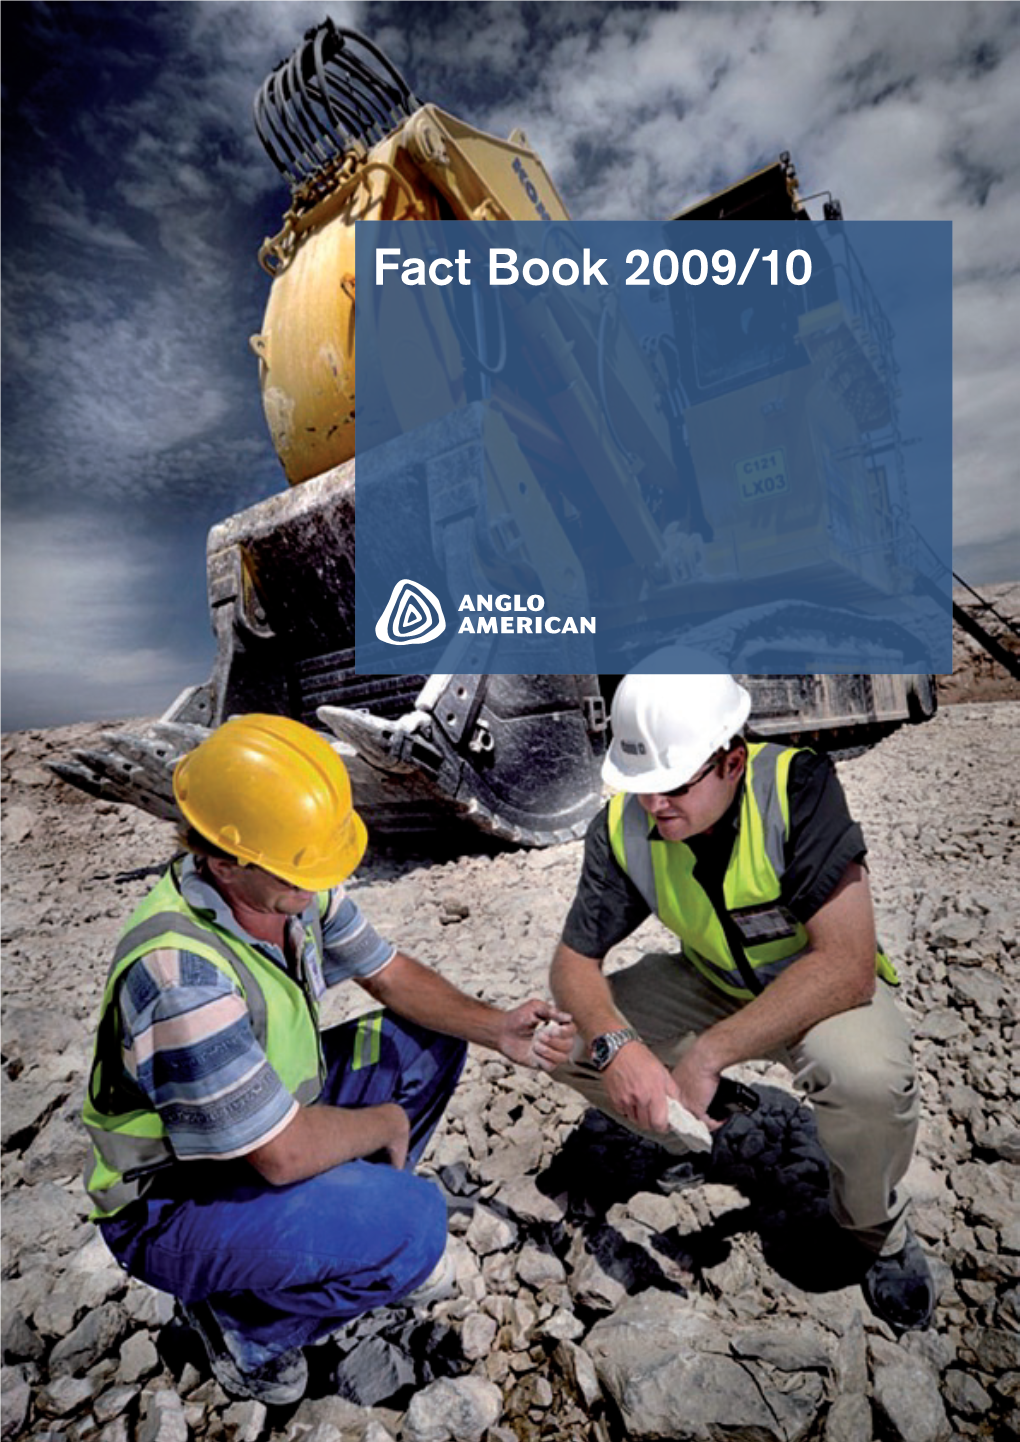 Fact Book 2009/10 Fact Book 2009/10 Our Mission